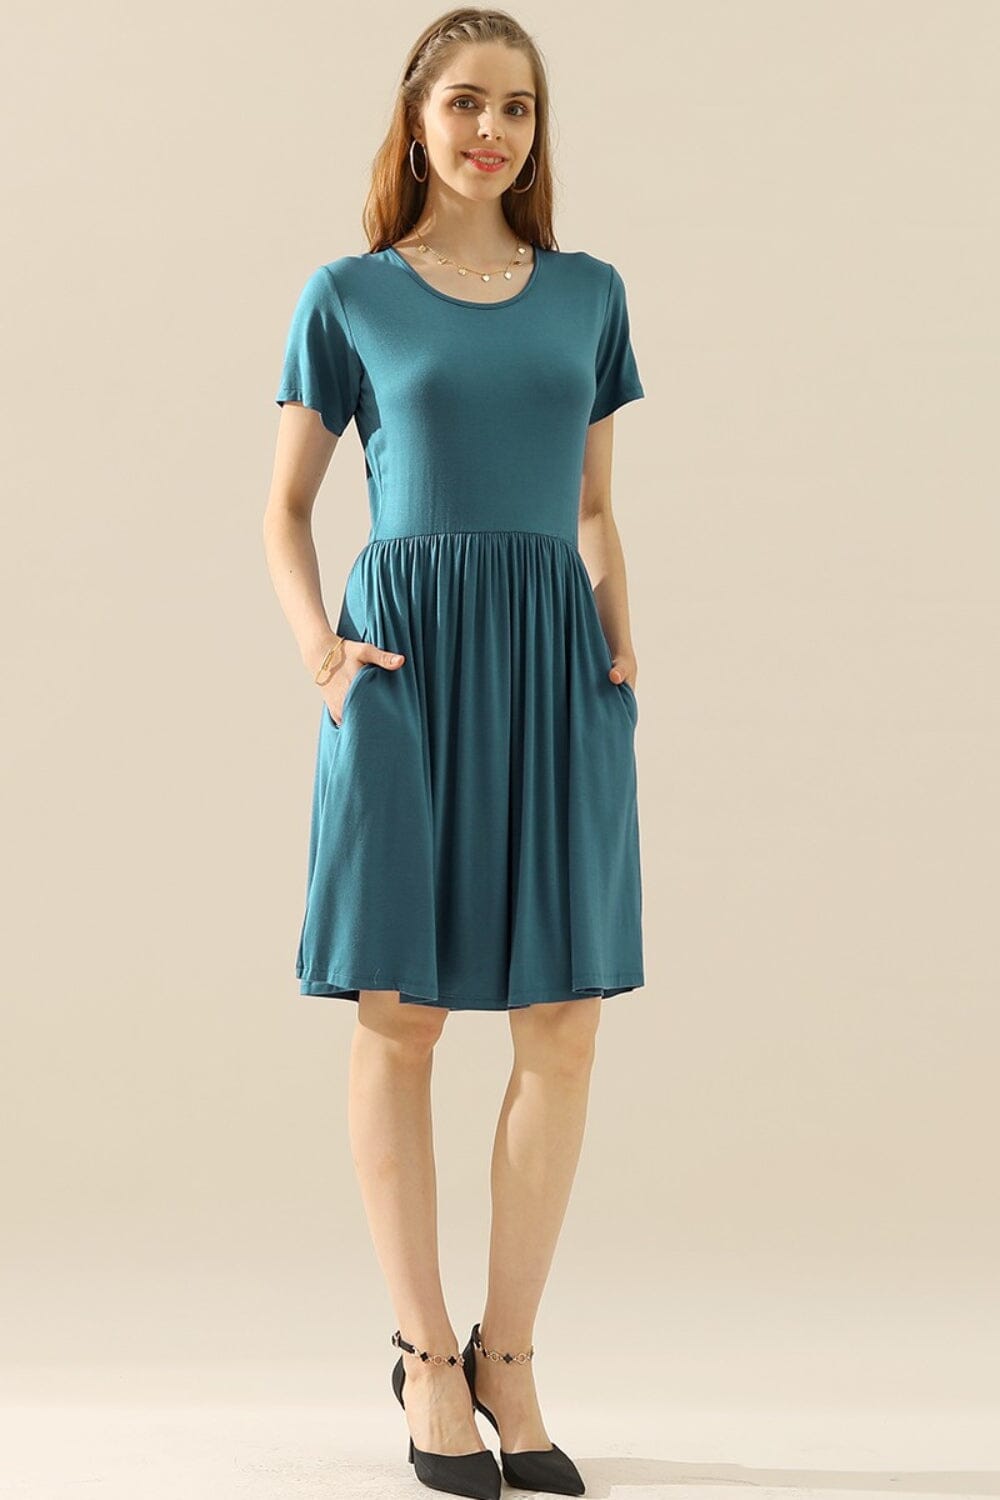 Ninexis Round Neck Ruched Dress with Pockets Dresses jehouze TEAL S 